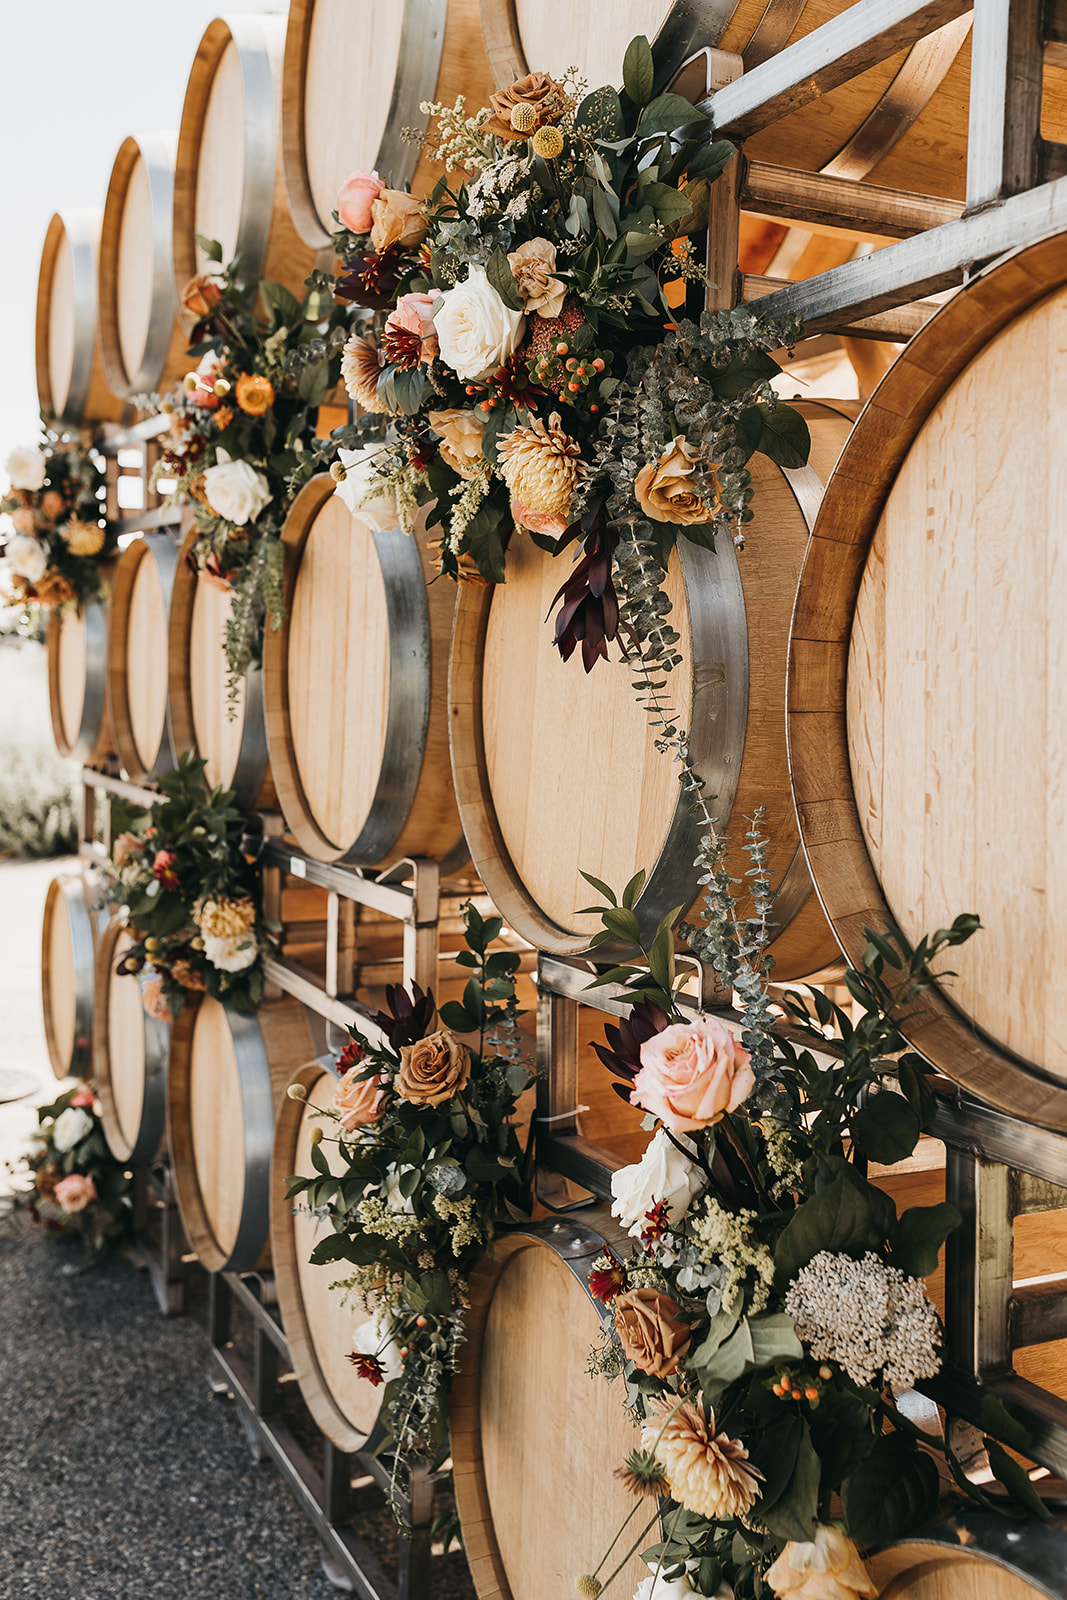 Stunning wedding details and florals by Simplified Celebrations at Cooper Wine company wedding in Washington